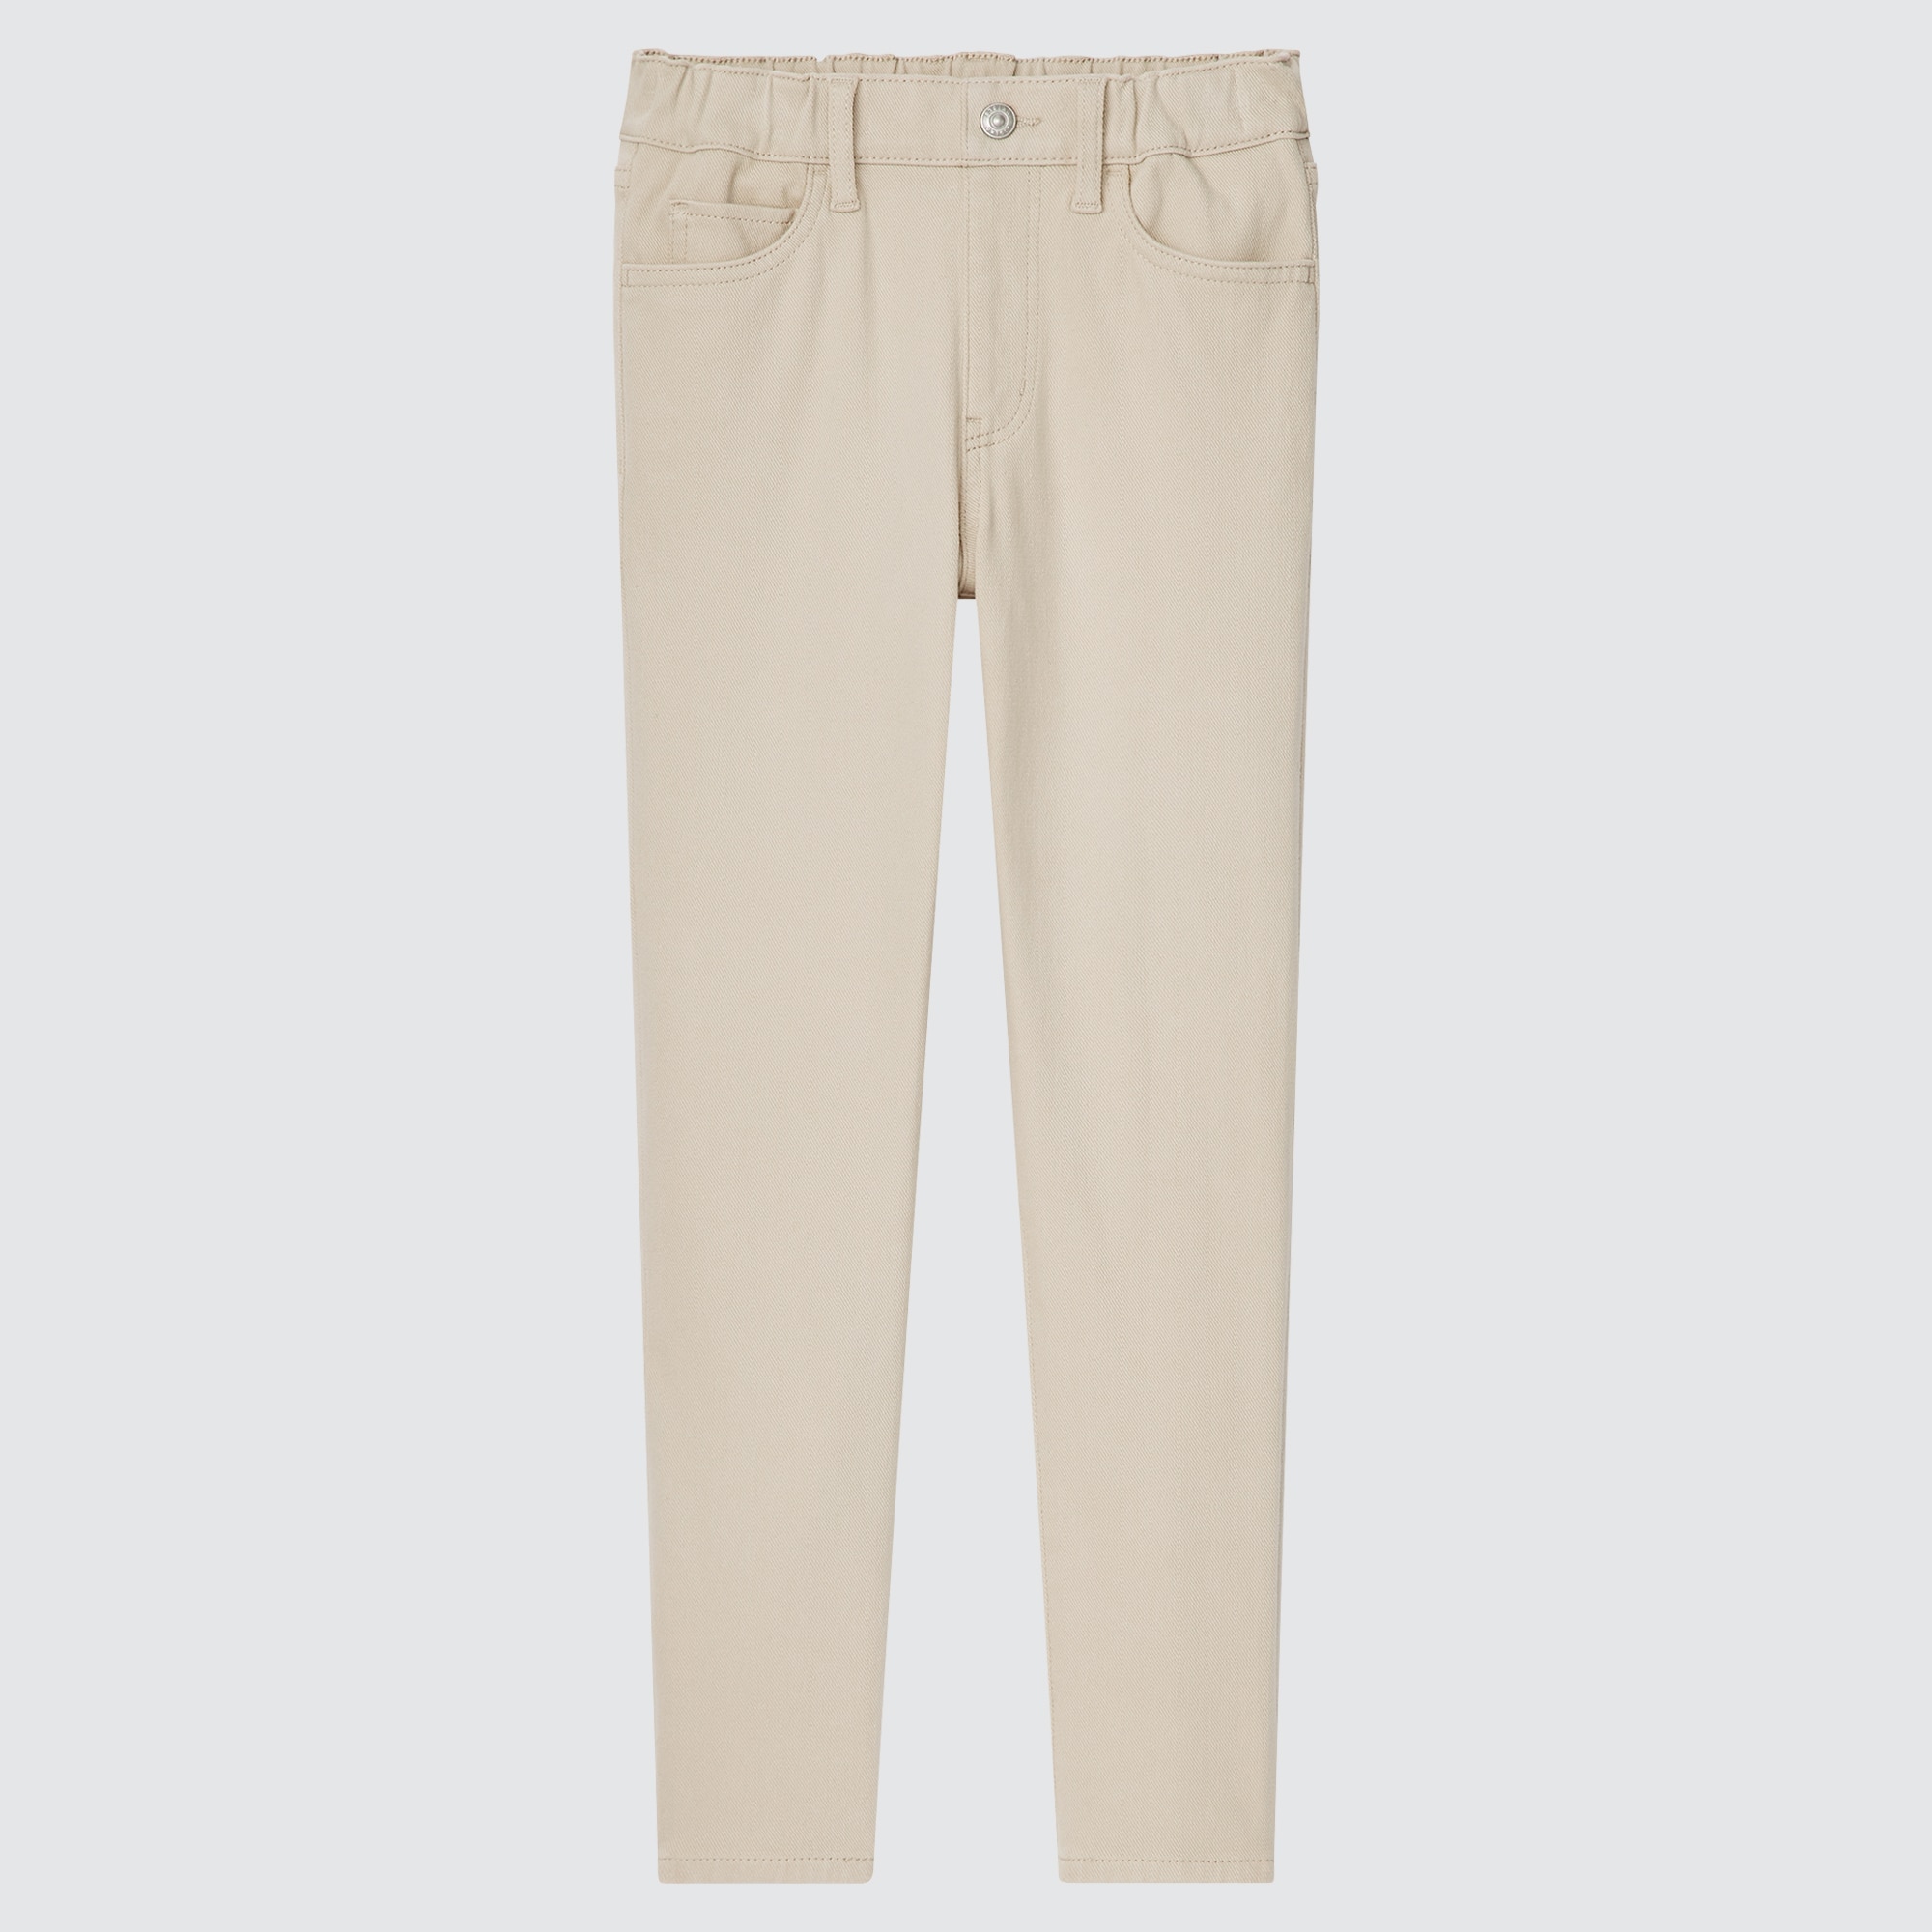 Uniqlo Ultra Stretch Skinny Fit Color Jeans Stylehint 5084